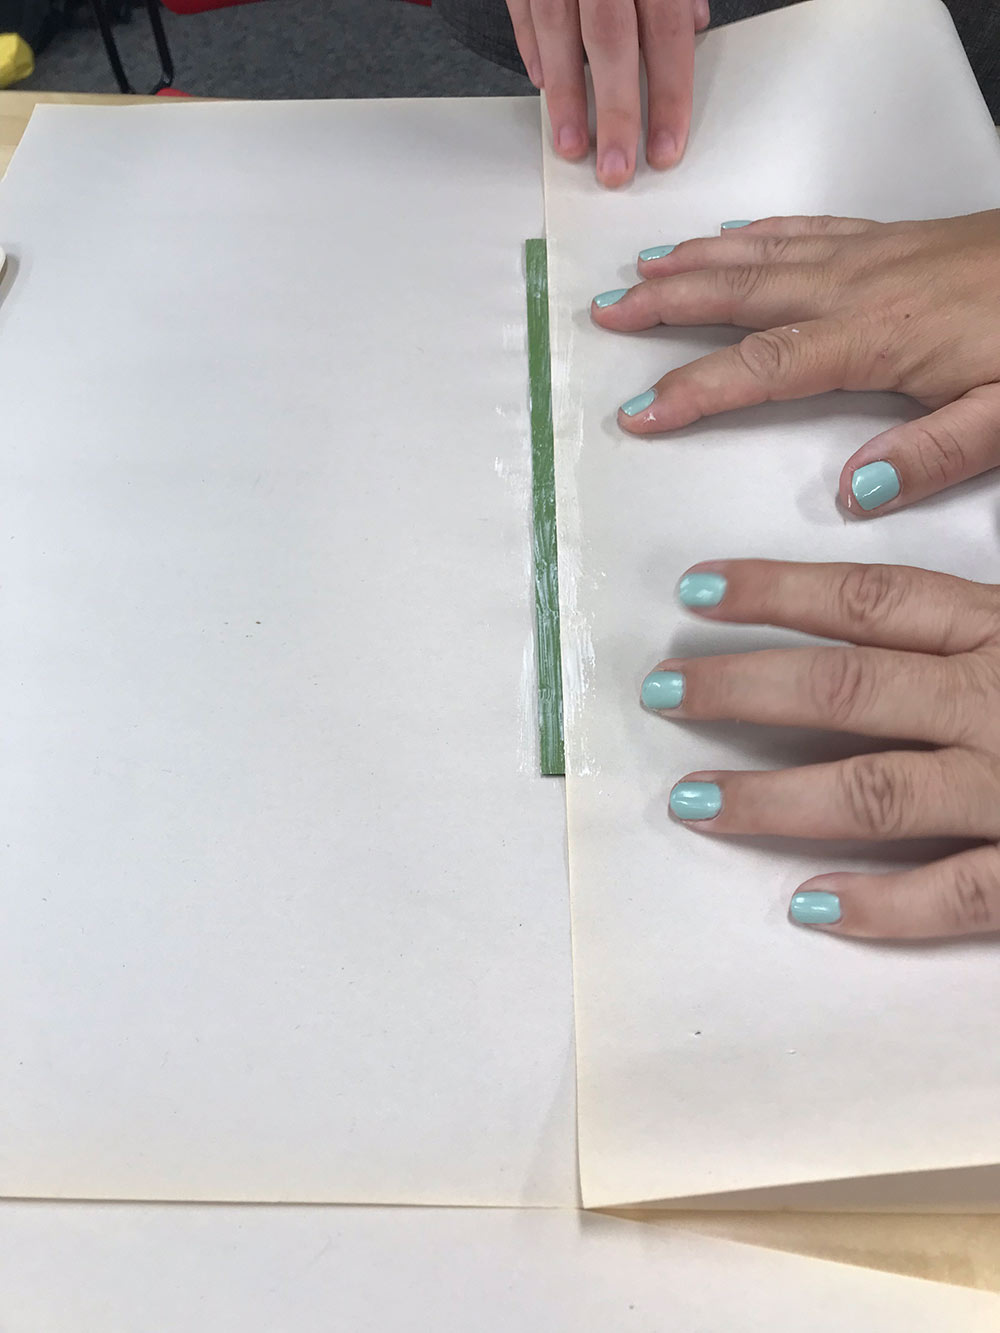 view of hands on paper